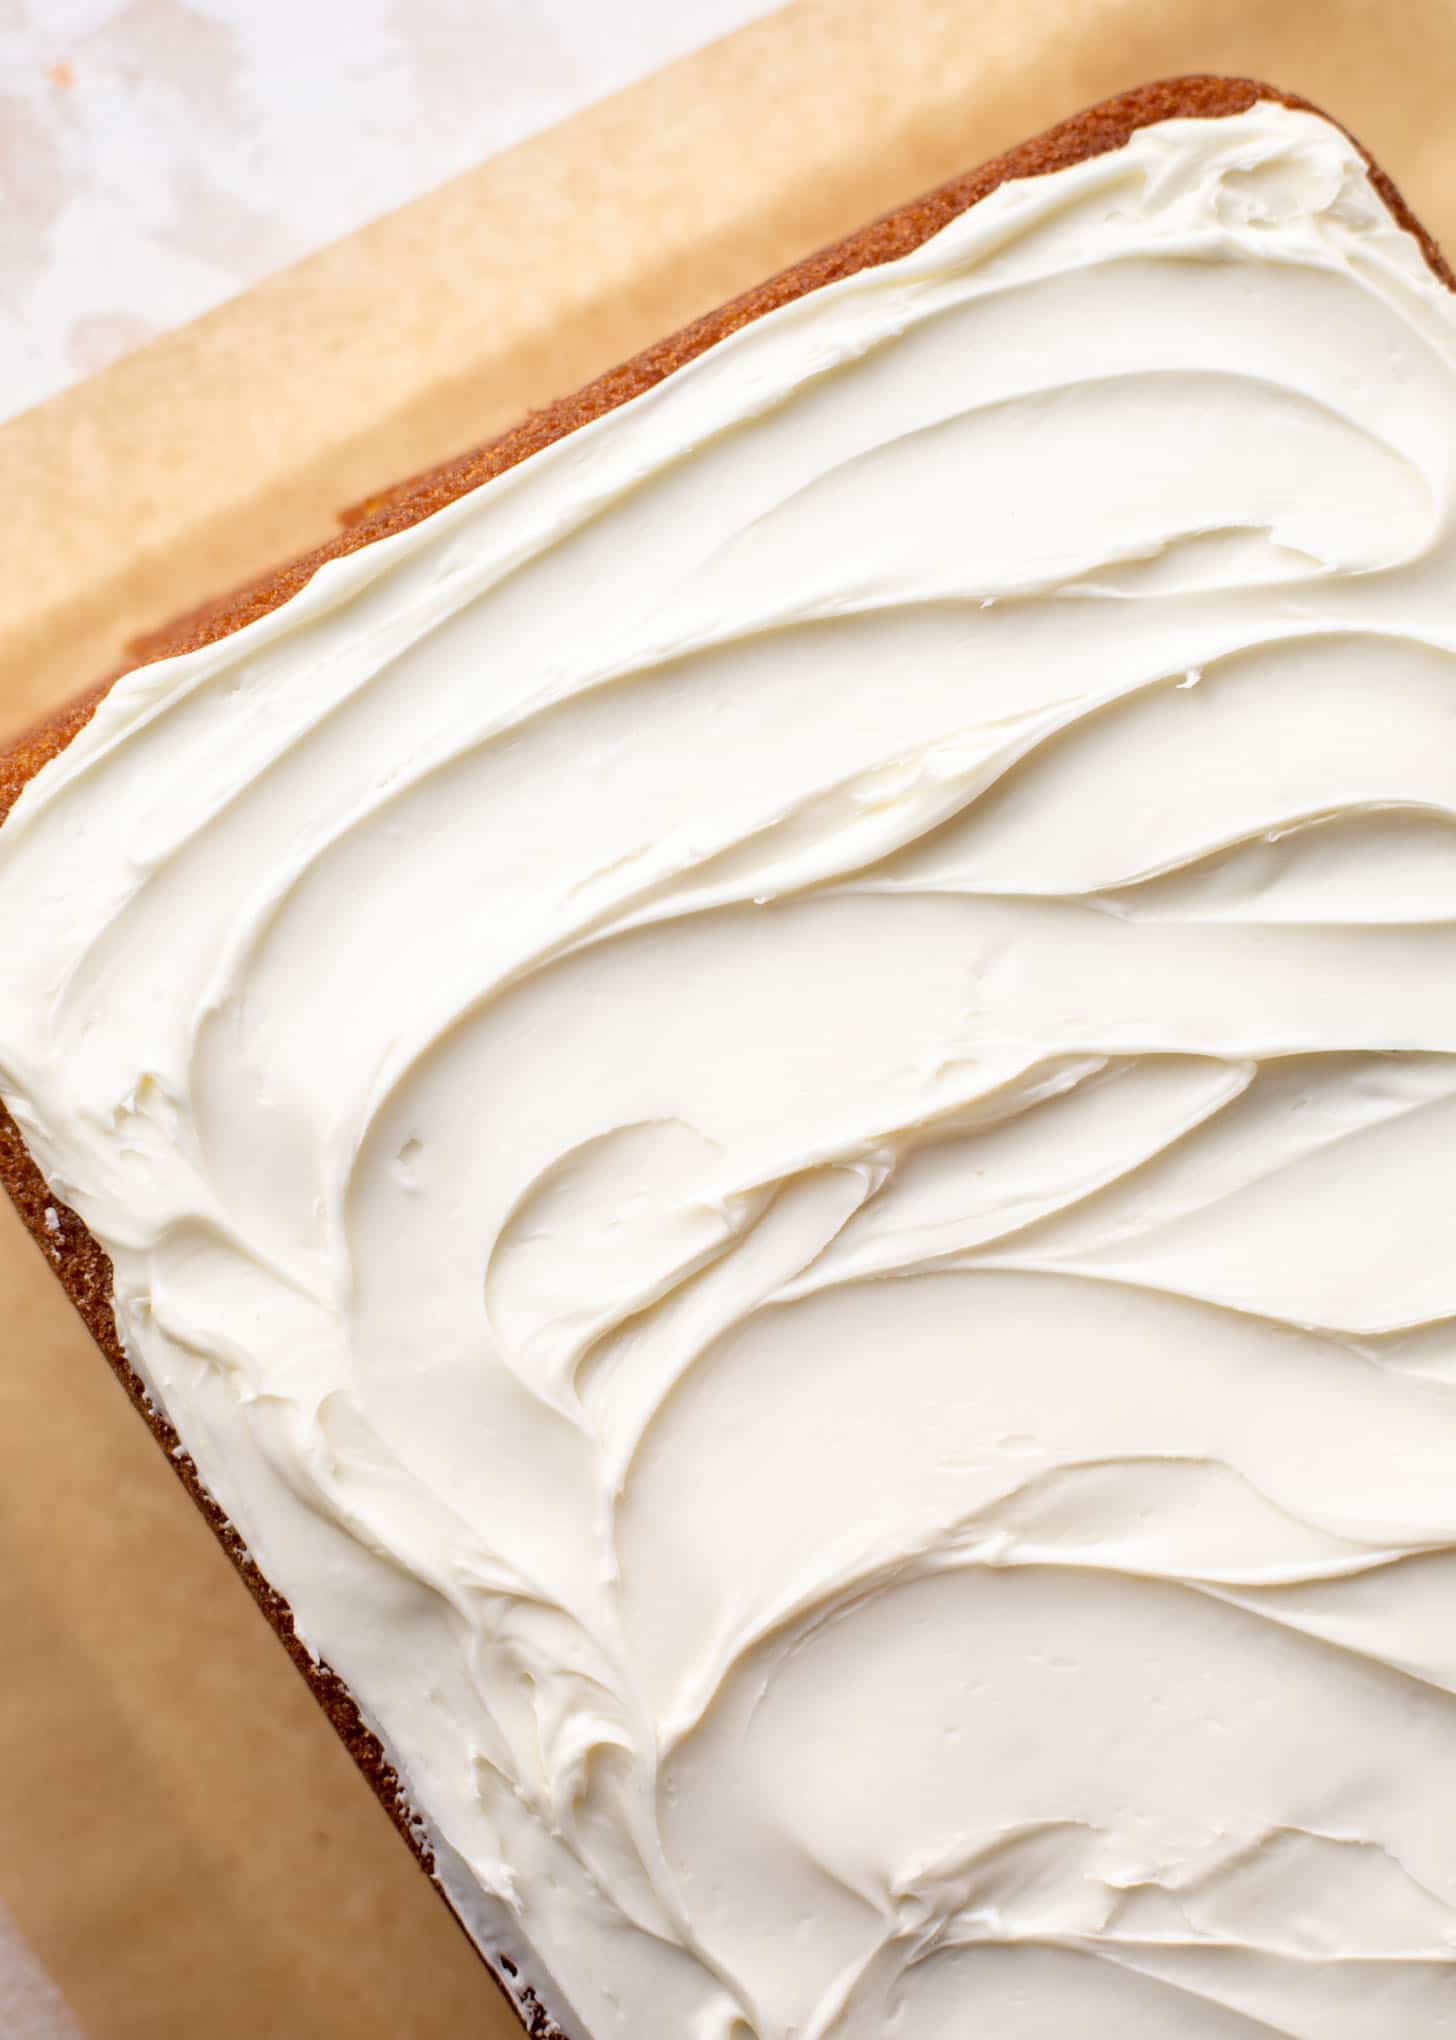 Orange Cake with Coconut Cream Cheese Frosting.